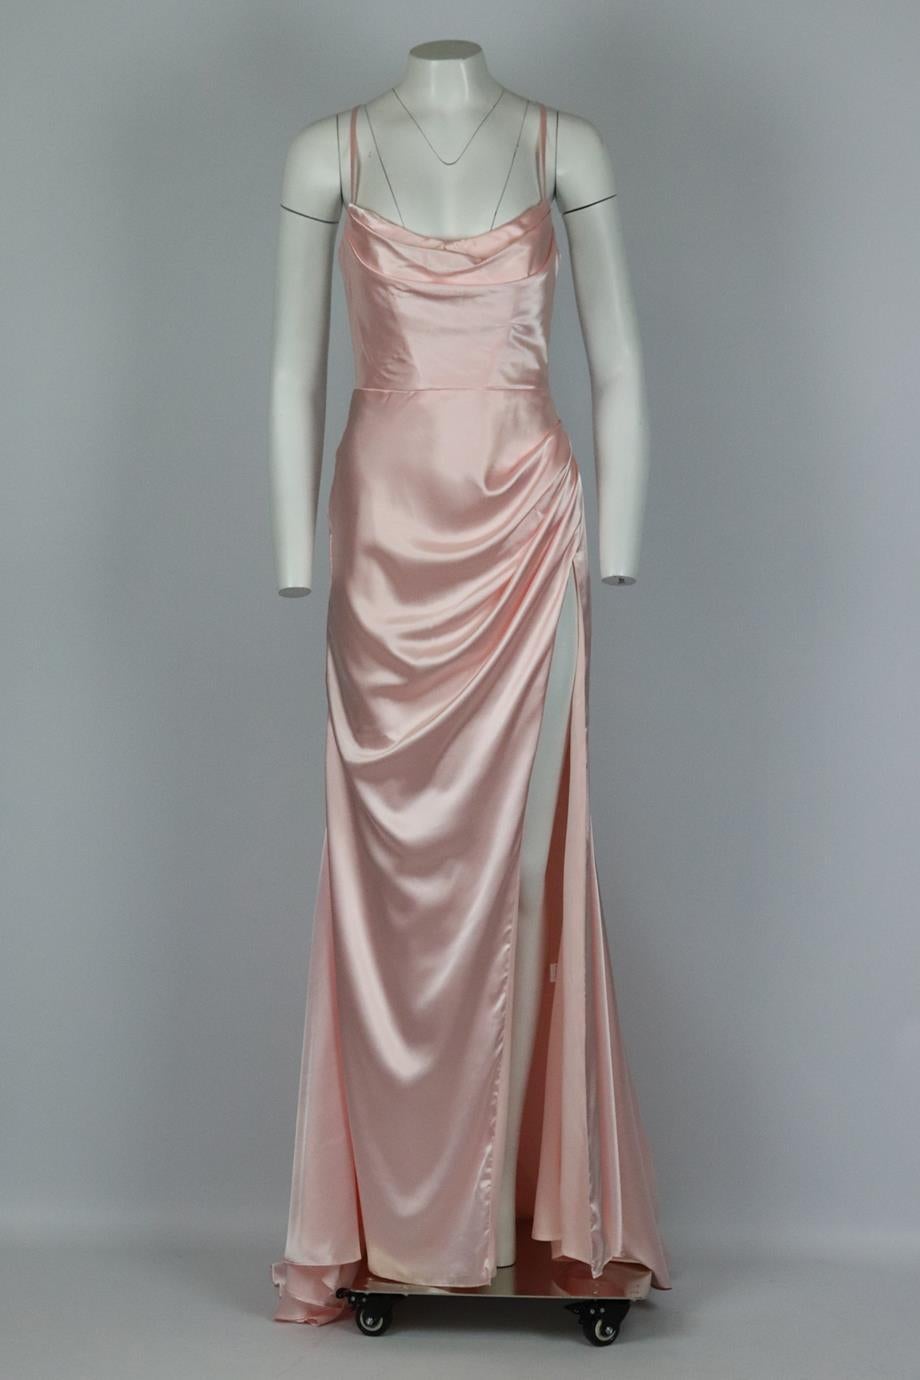 To The Nines open back draped satin gown. Light-pink. Sleeveless, cowl neck. Zip fastening at back. 100% Polyester. Size: UK 10 (US 6, FR 38, IT 42) Bust: 34 in. Waist: 28 in. Hips: 37 in. Length: 62 in. New with tags
